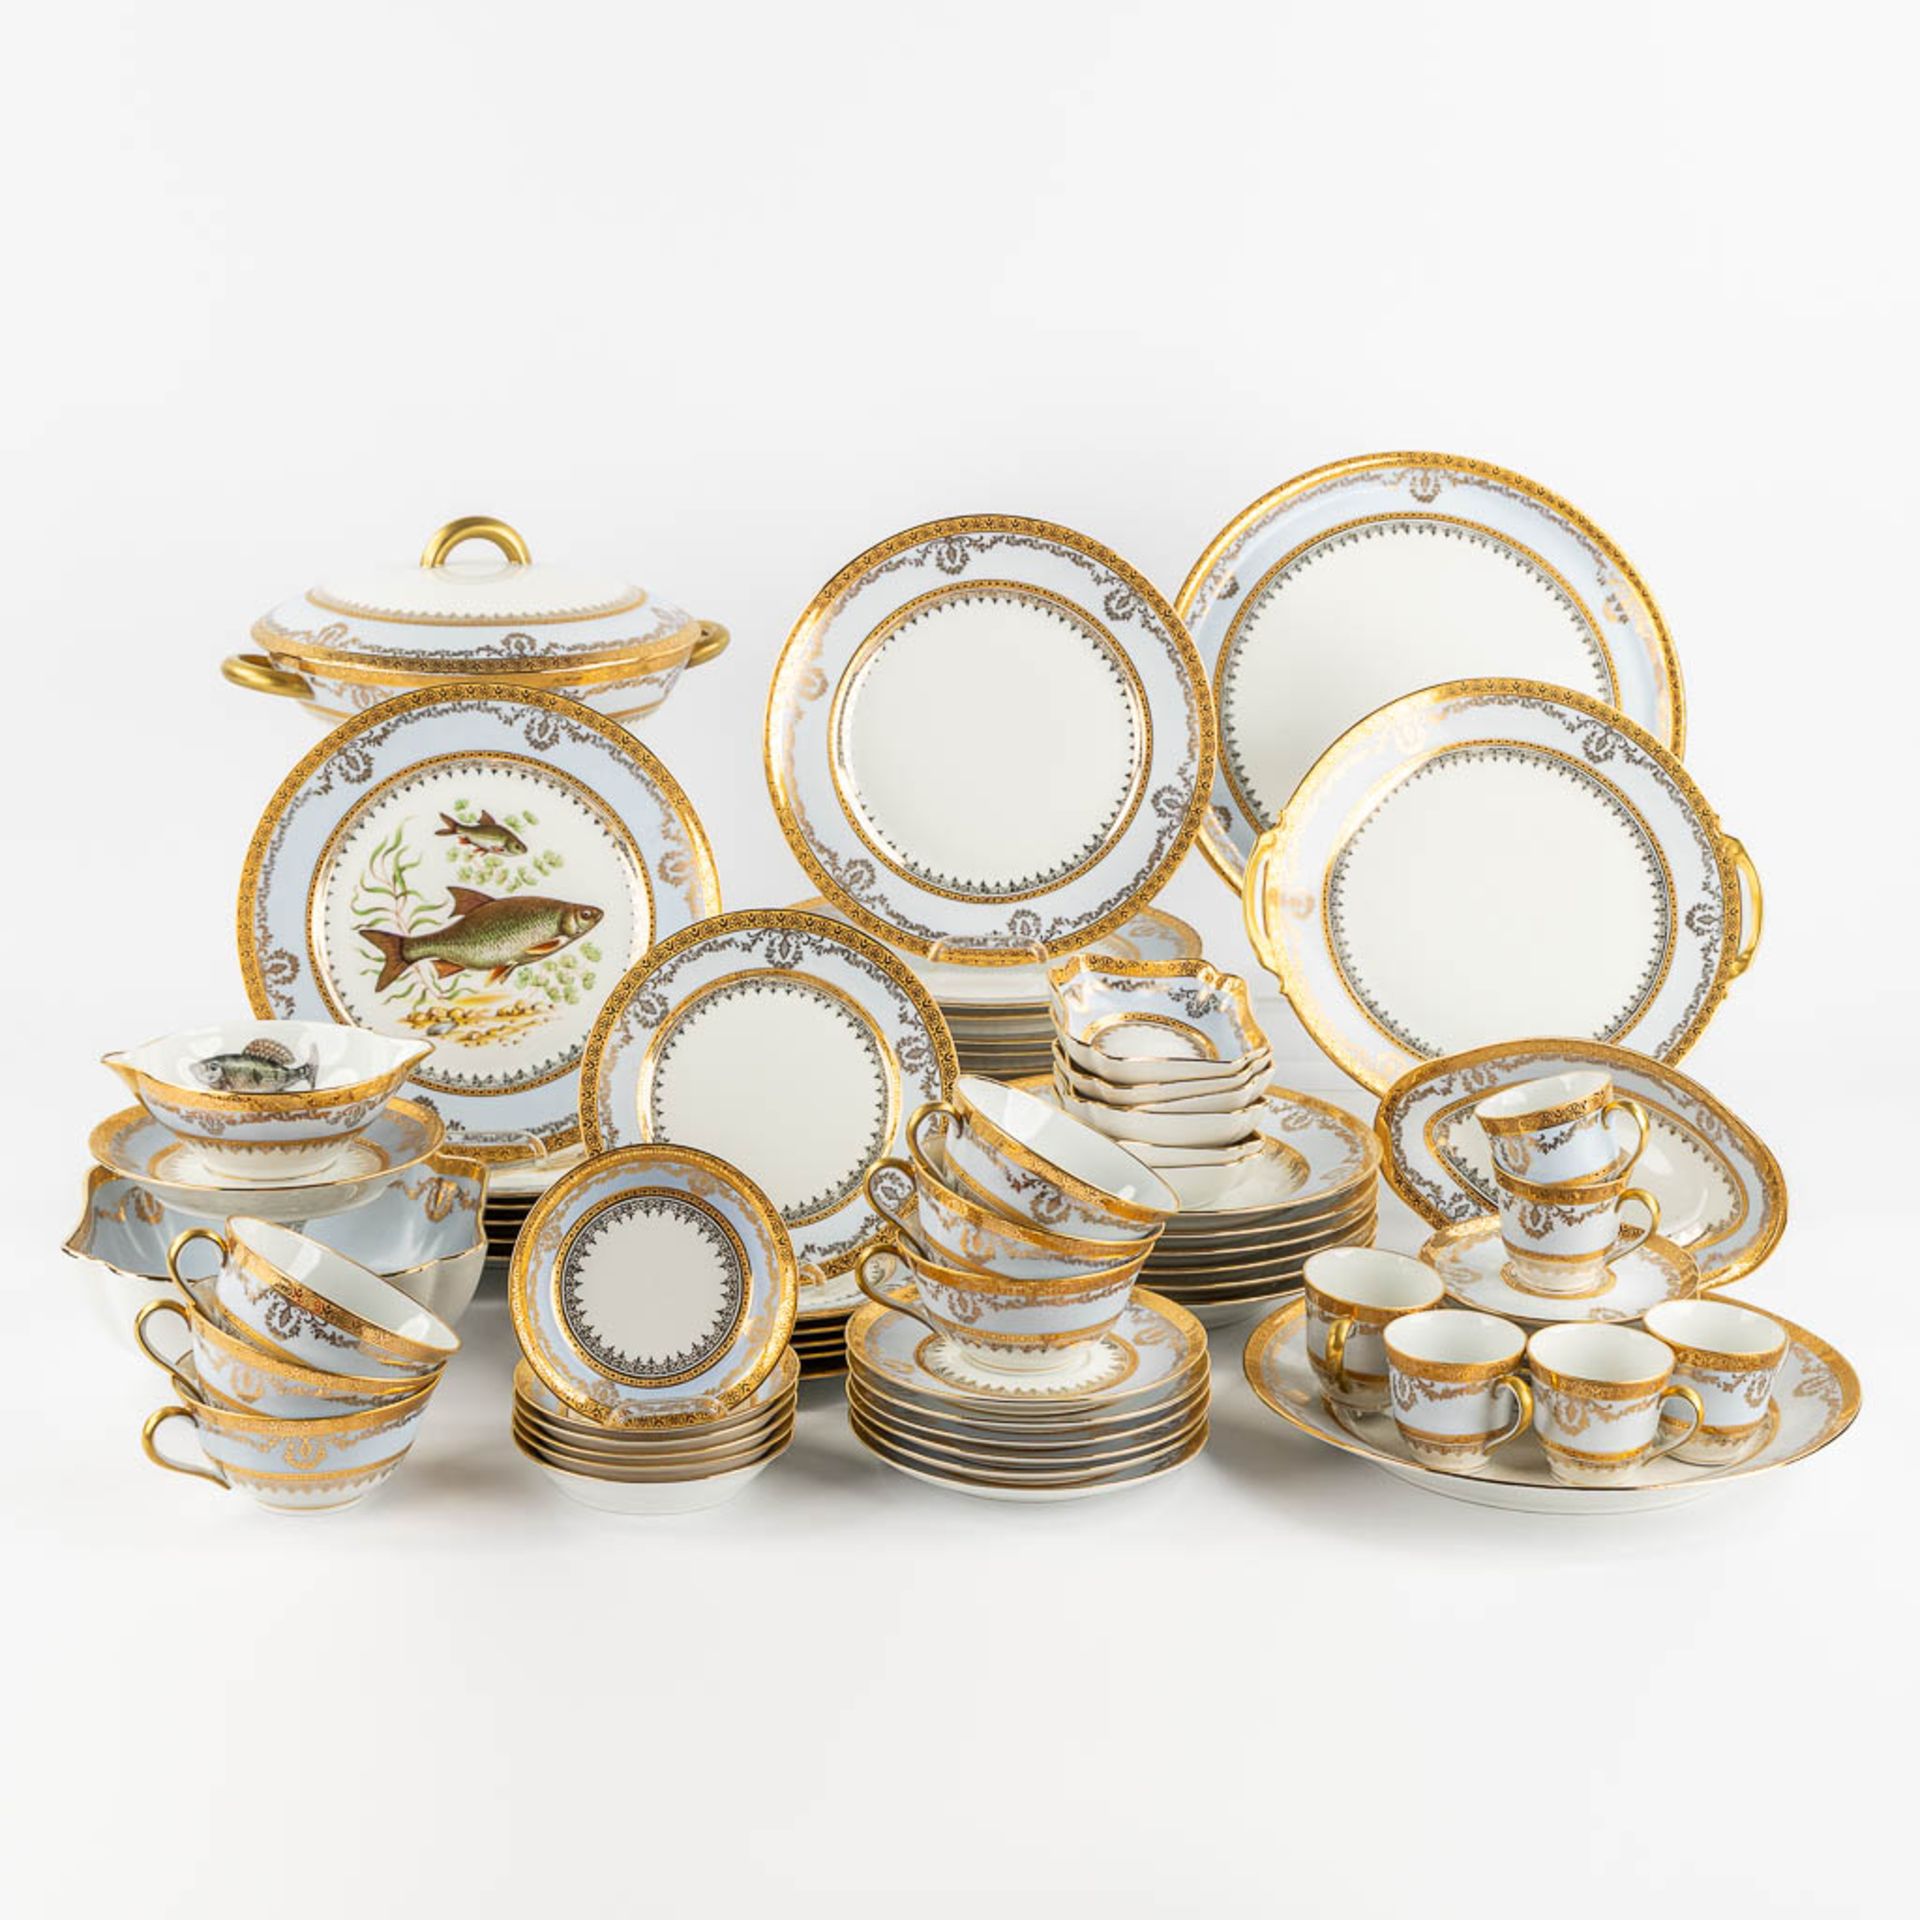 Salmon & Cie, Limoges, a large 73-piece dinner, coffee and tea service with a gilt rim. (D:31 cm